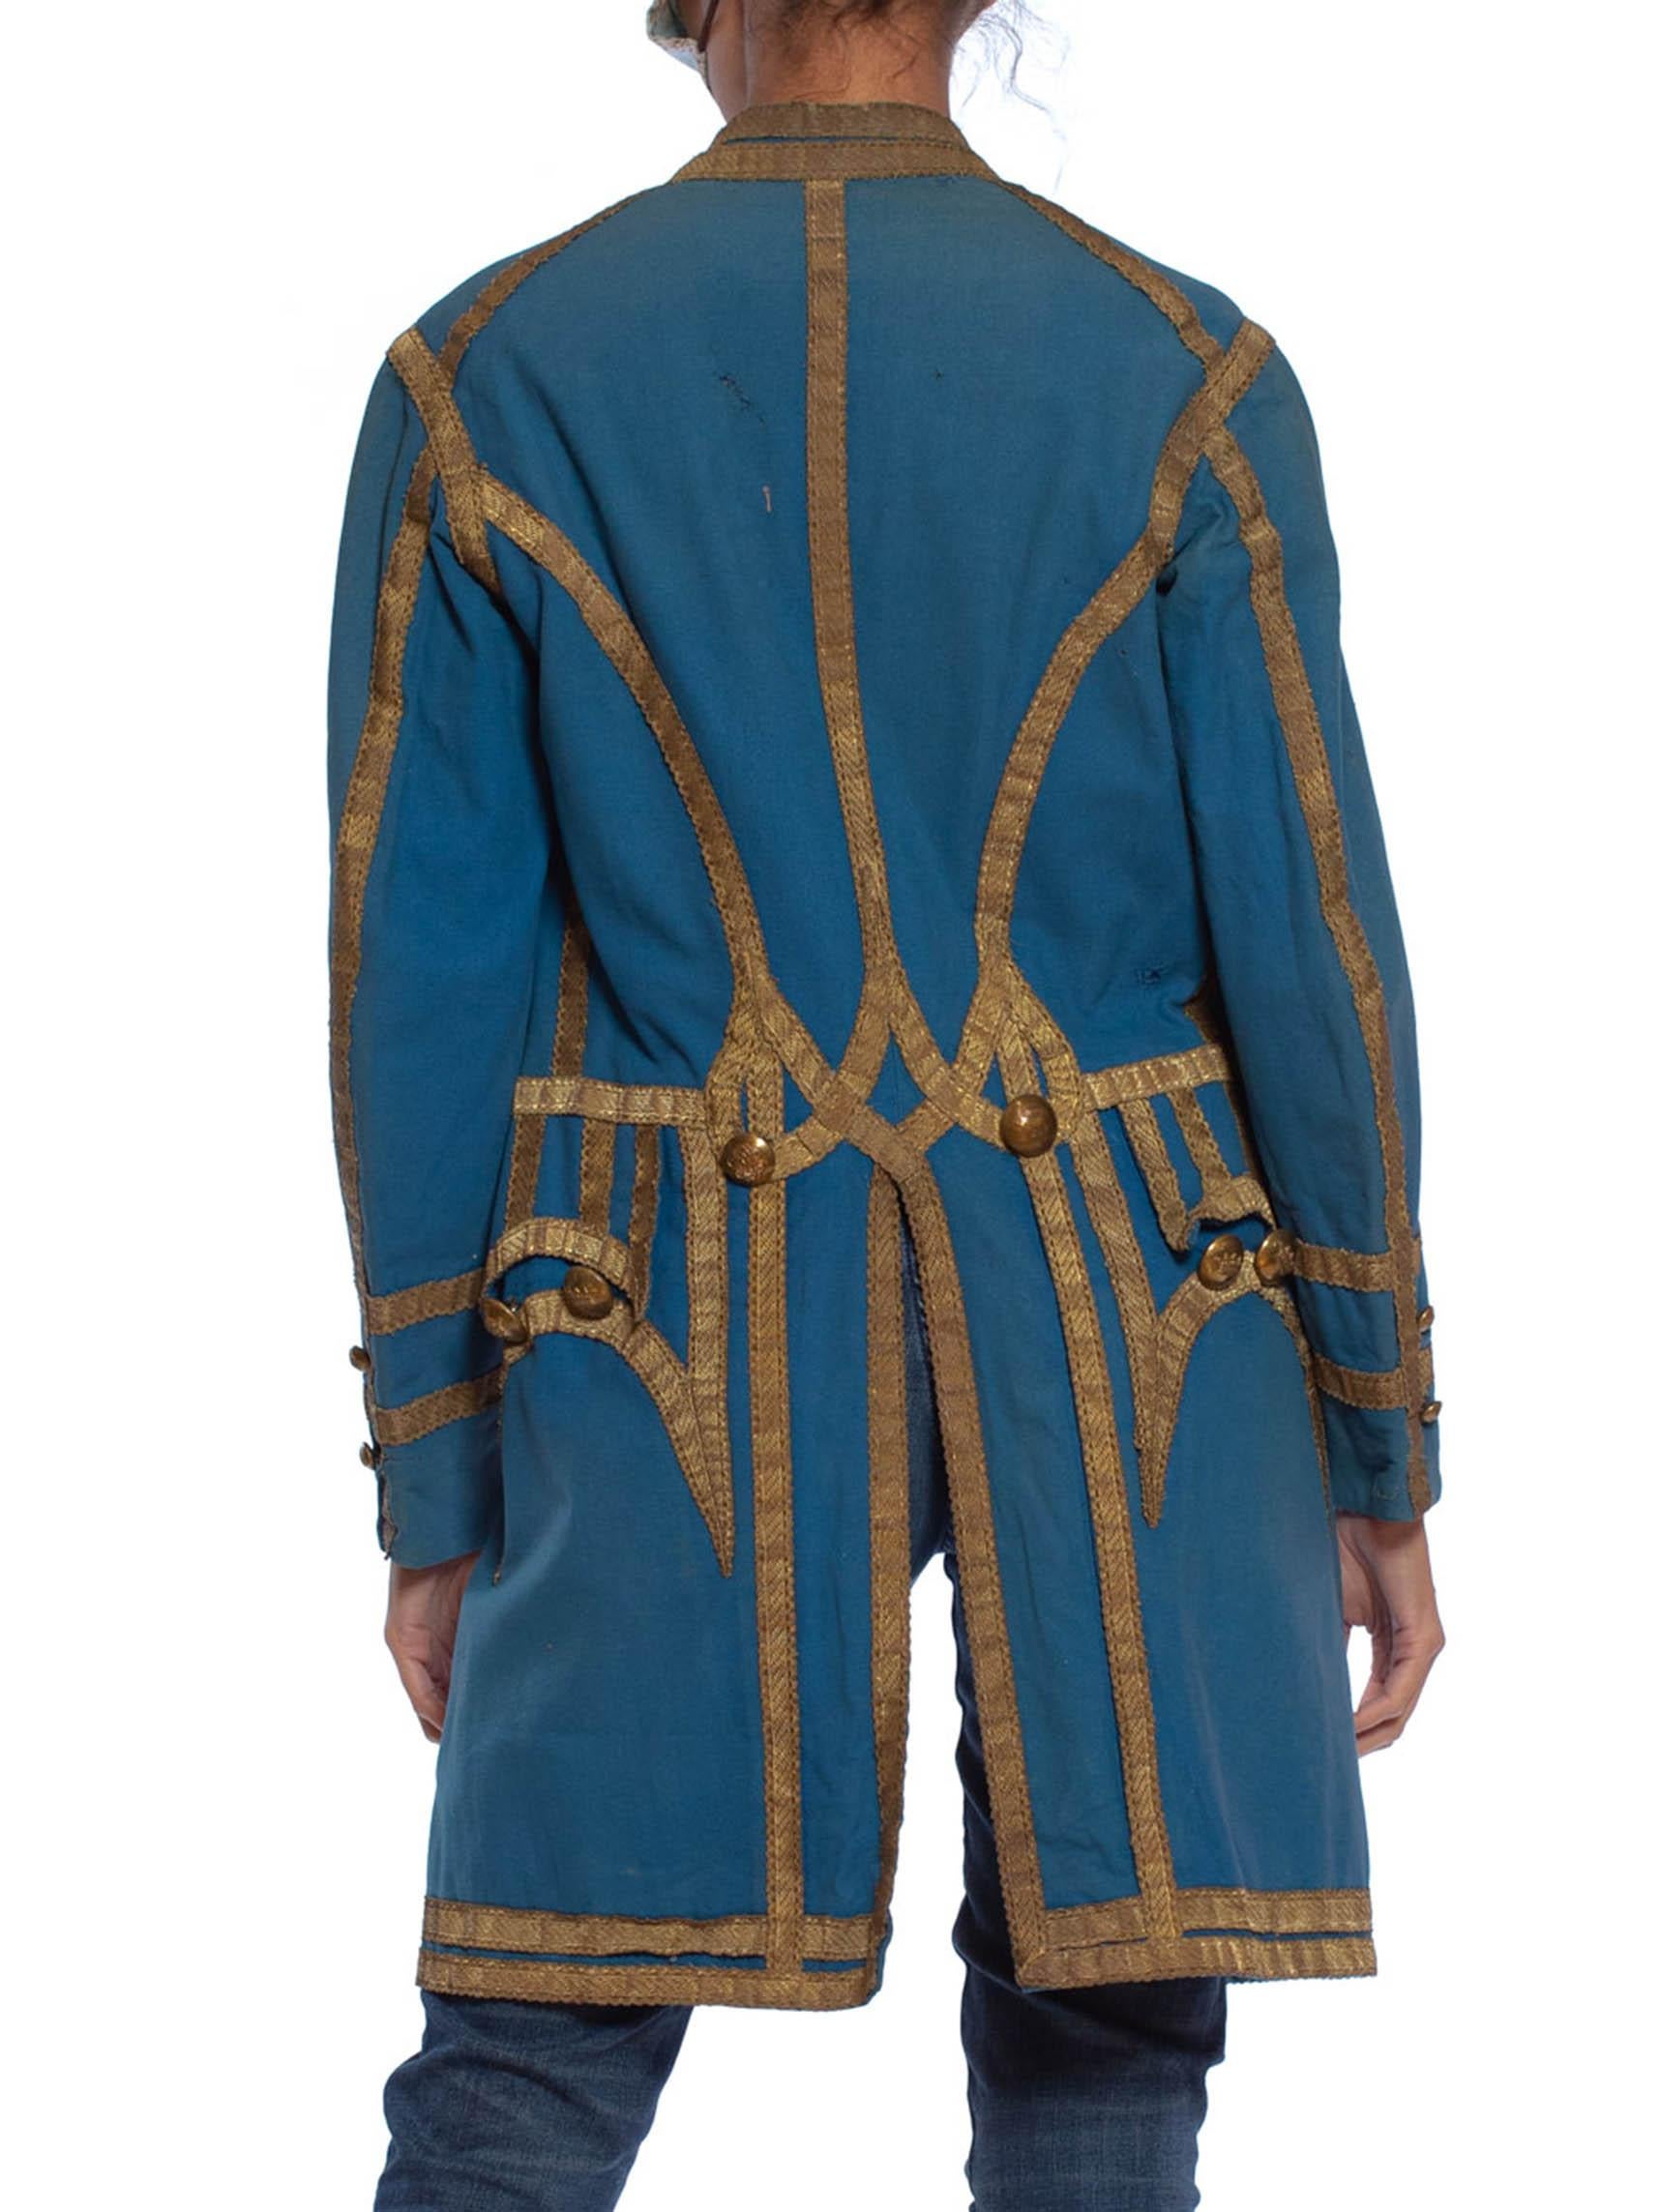 Victorian Blue  Wool Men's 18Th Century Style Frock Coat With Gold Metal Trim In Excellent Condition For Sale In New York, NY